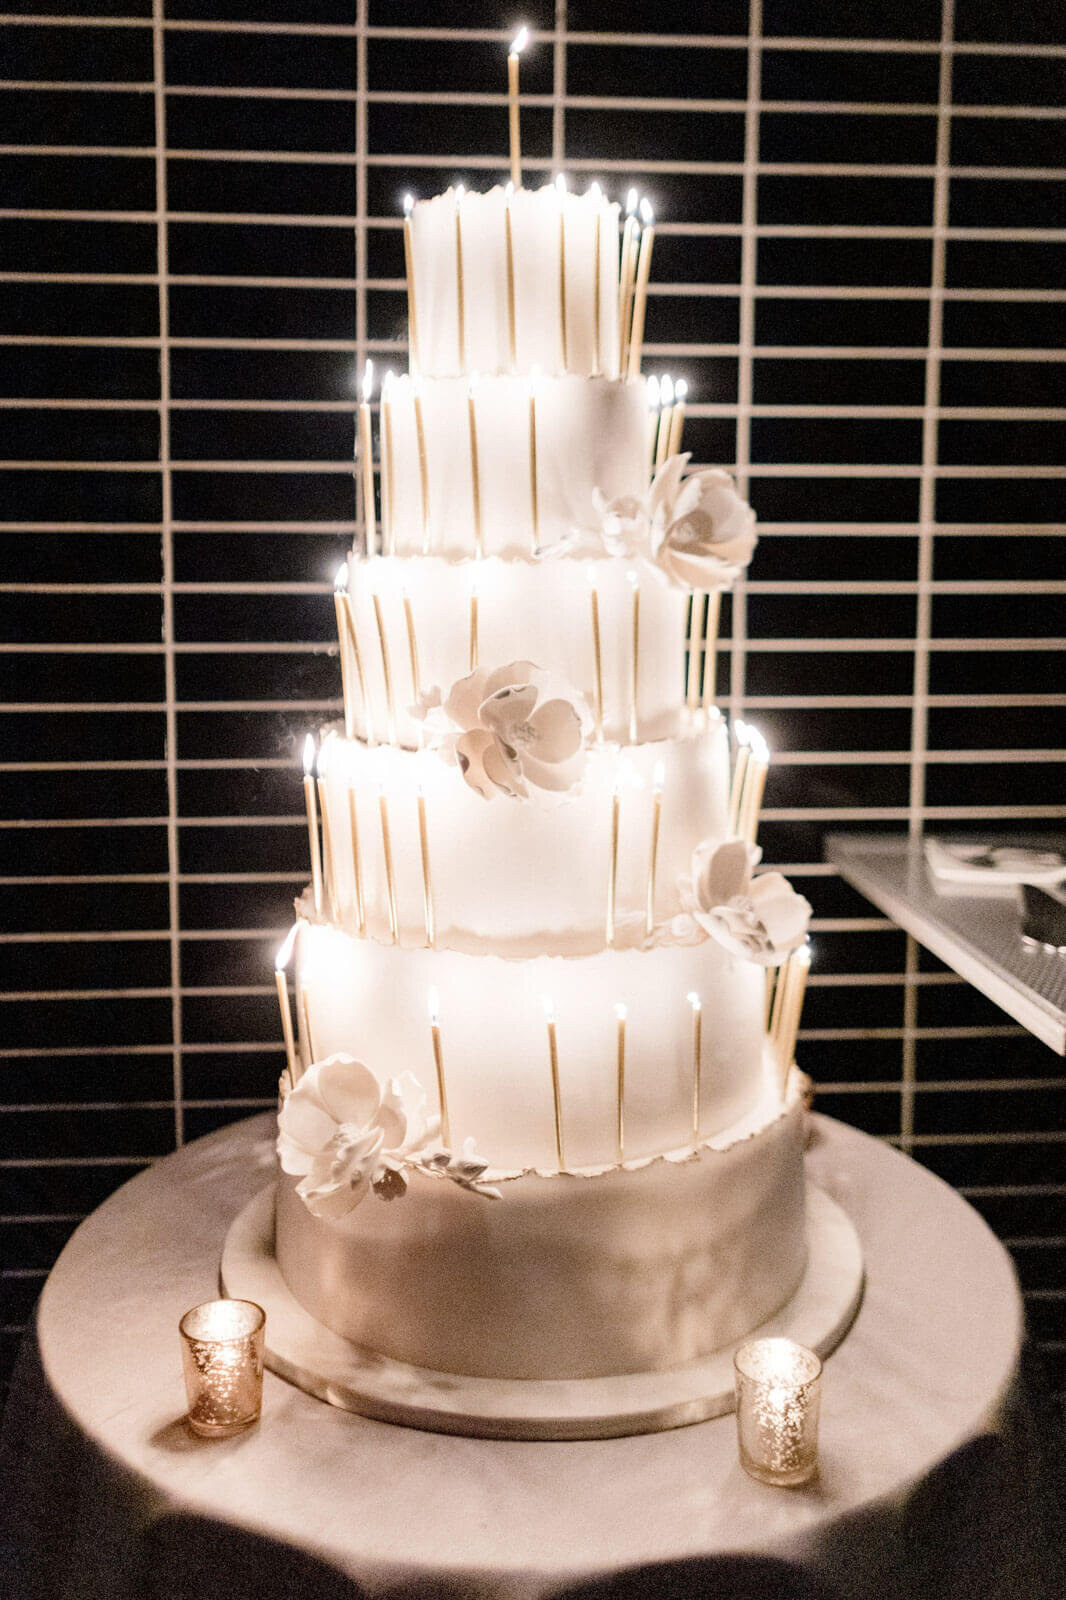 A huge, 6-layer white, monochromatic wedding cake with white candles in The Skylark, New York. Wedding Image by Jenny Fu Studio